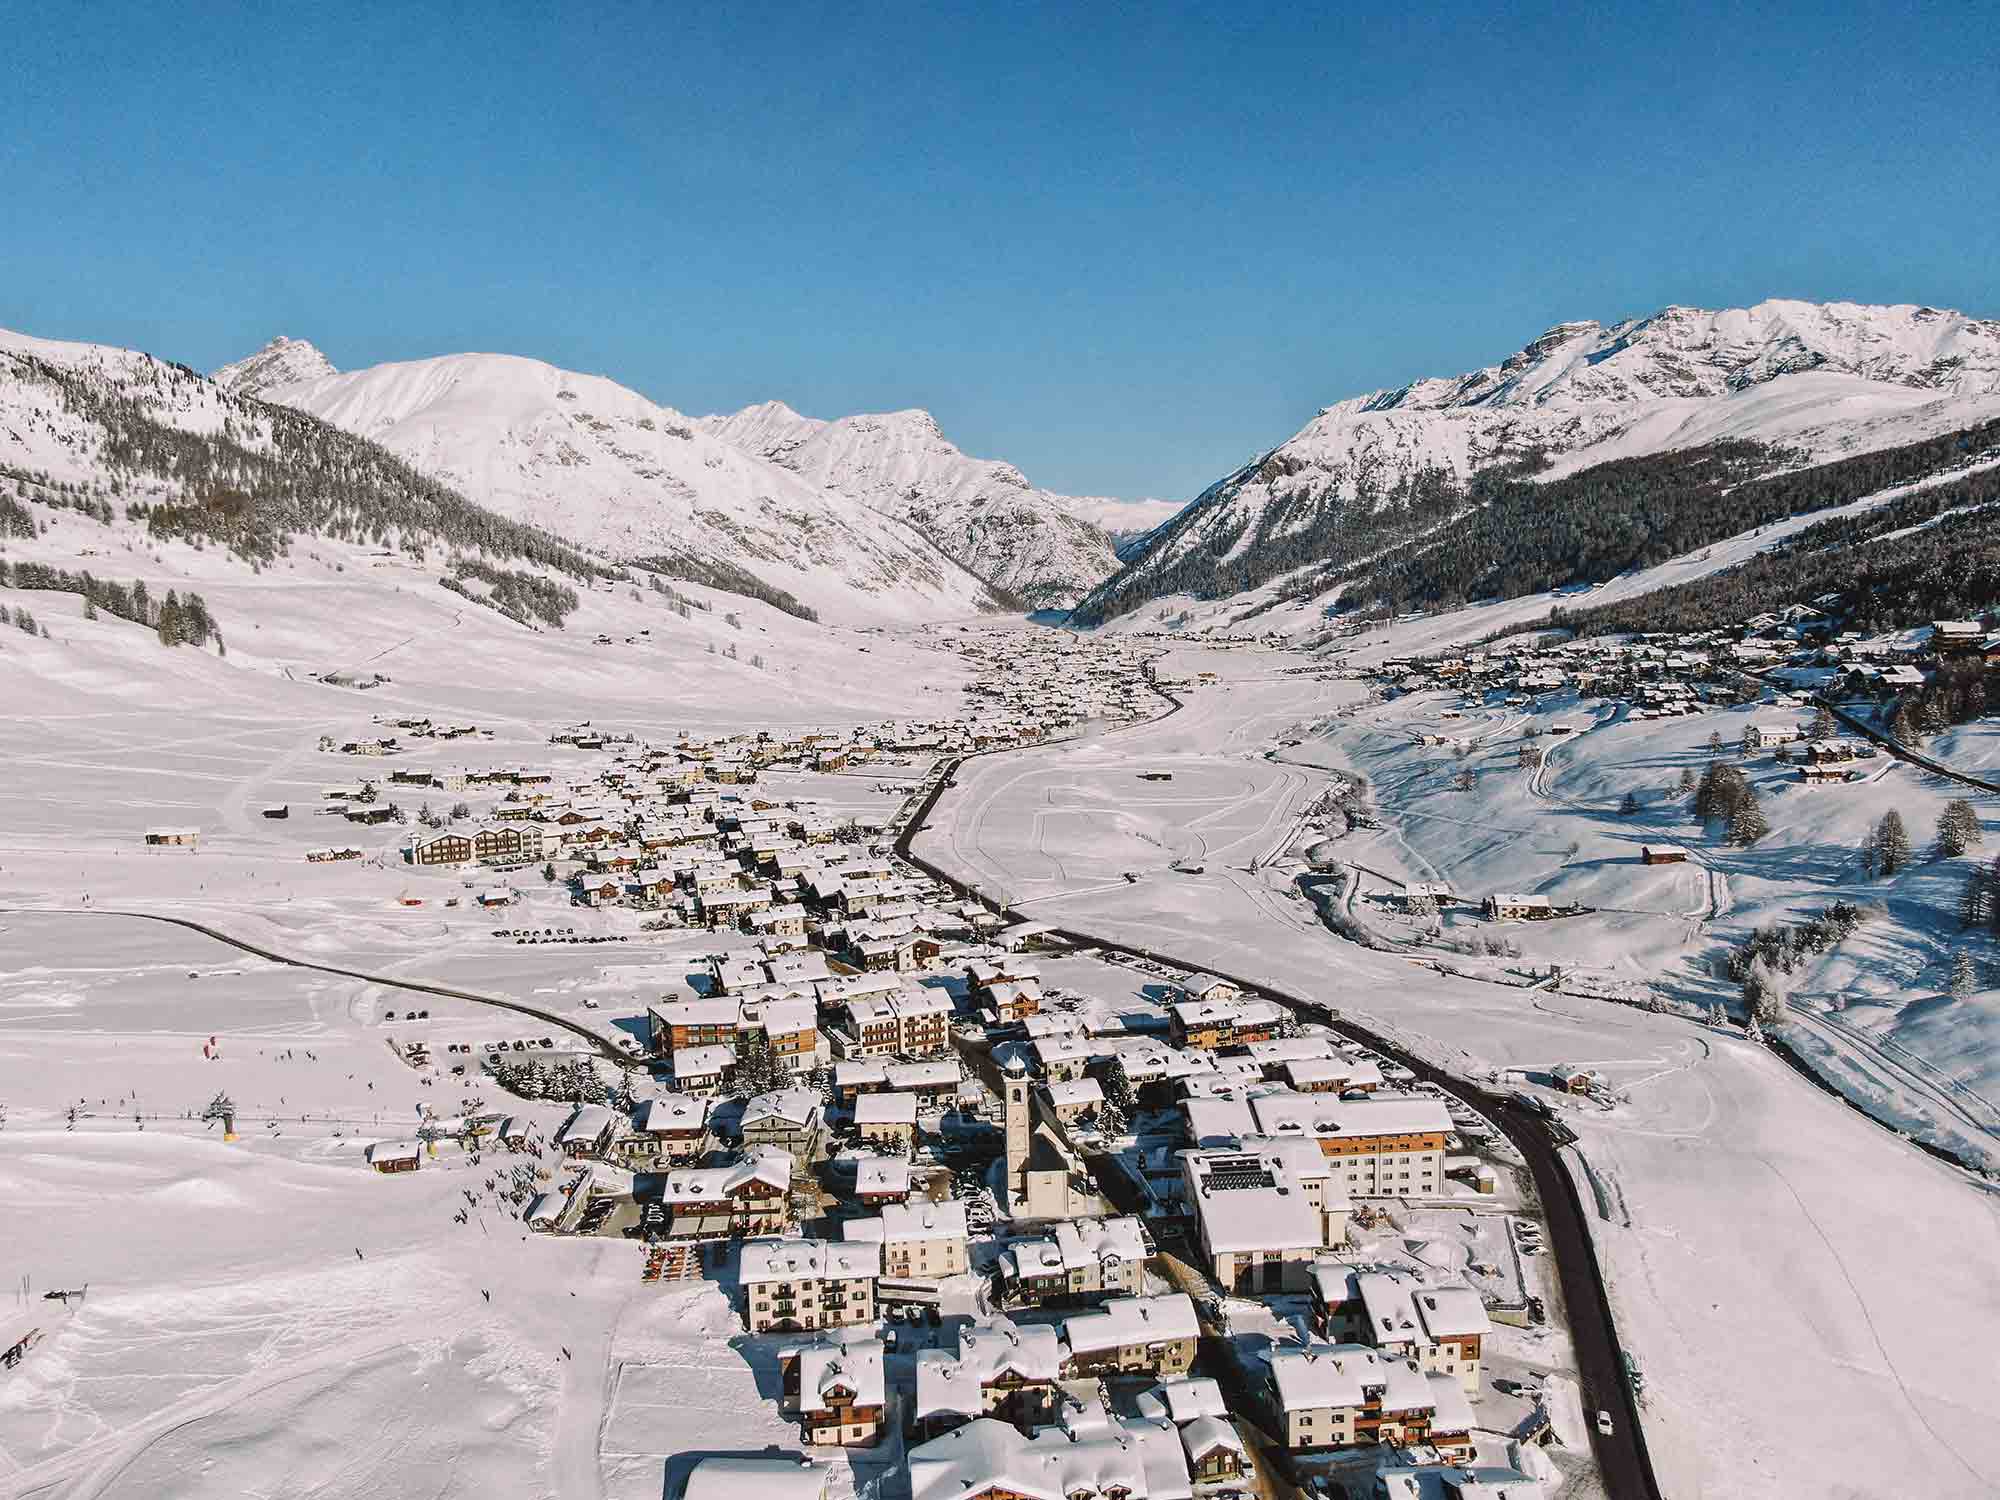 Aerial view of a snow-covered mountain village in Livigno